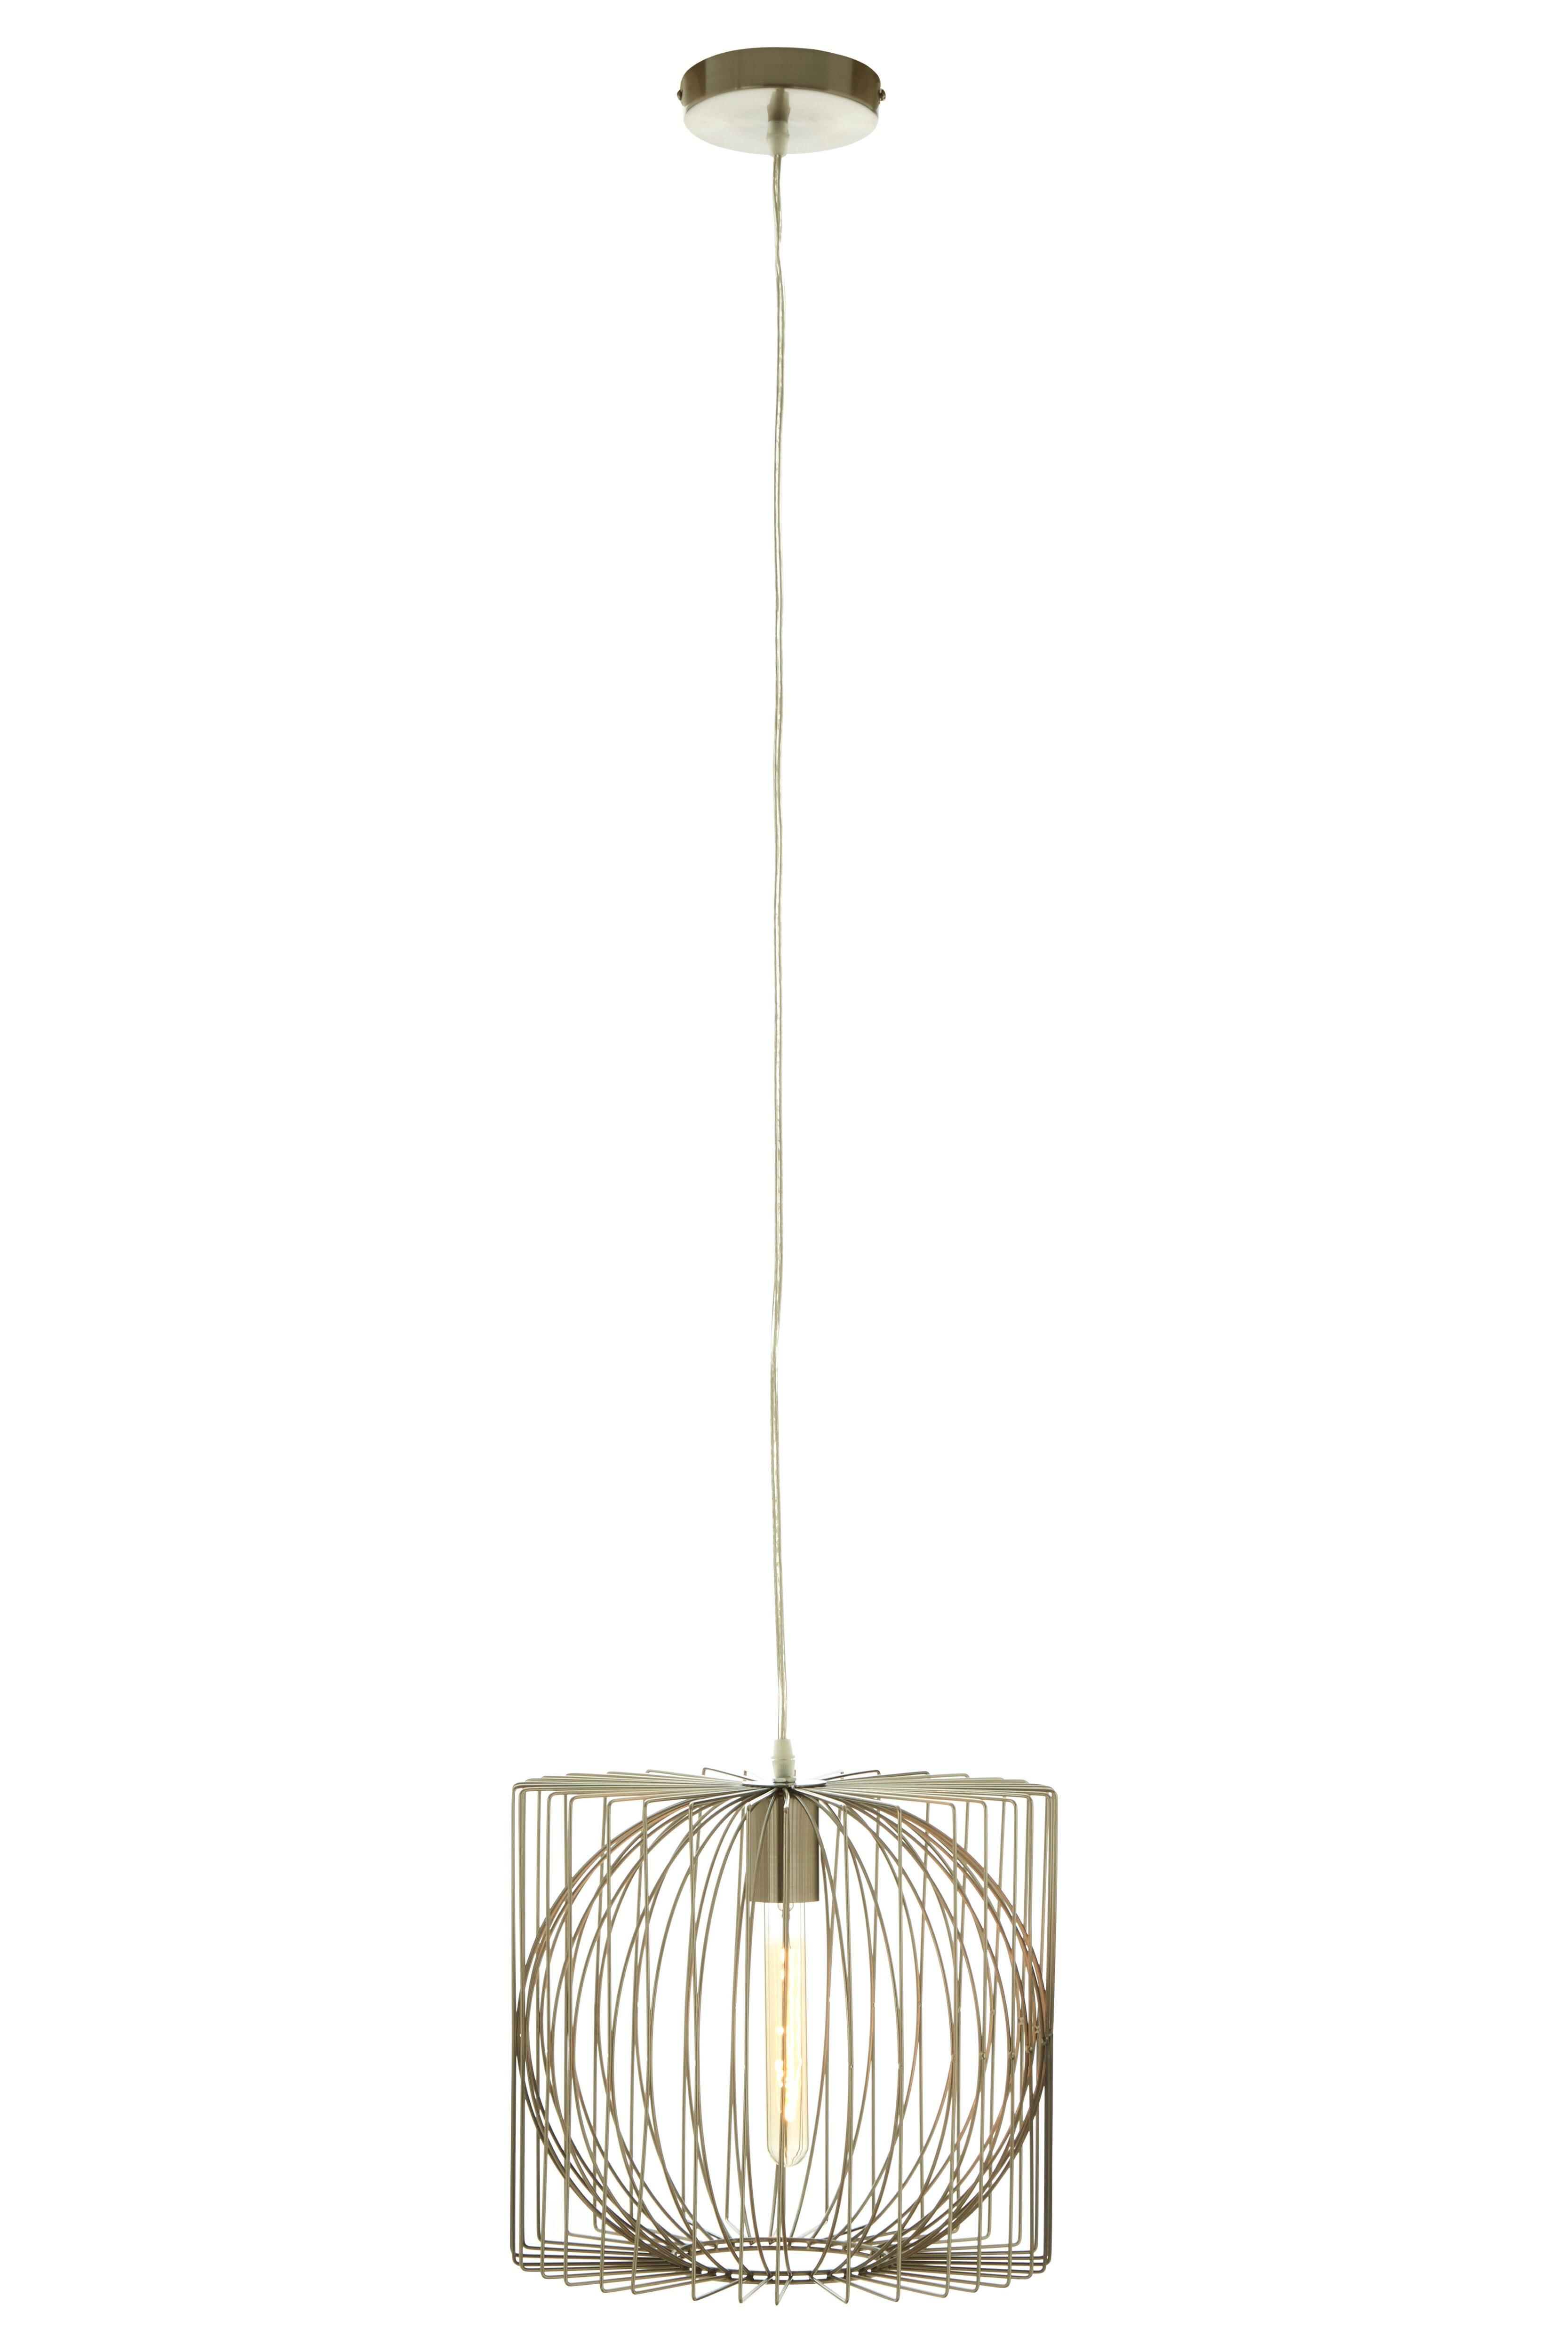 Interiors by Premier Aselo Silver Finish Pendant Lamp